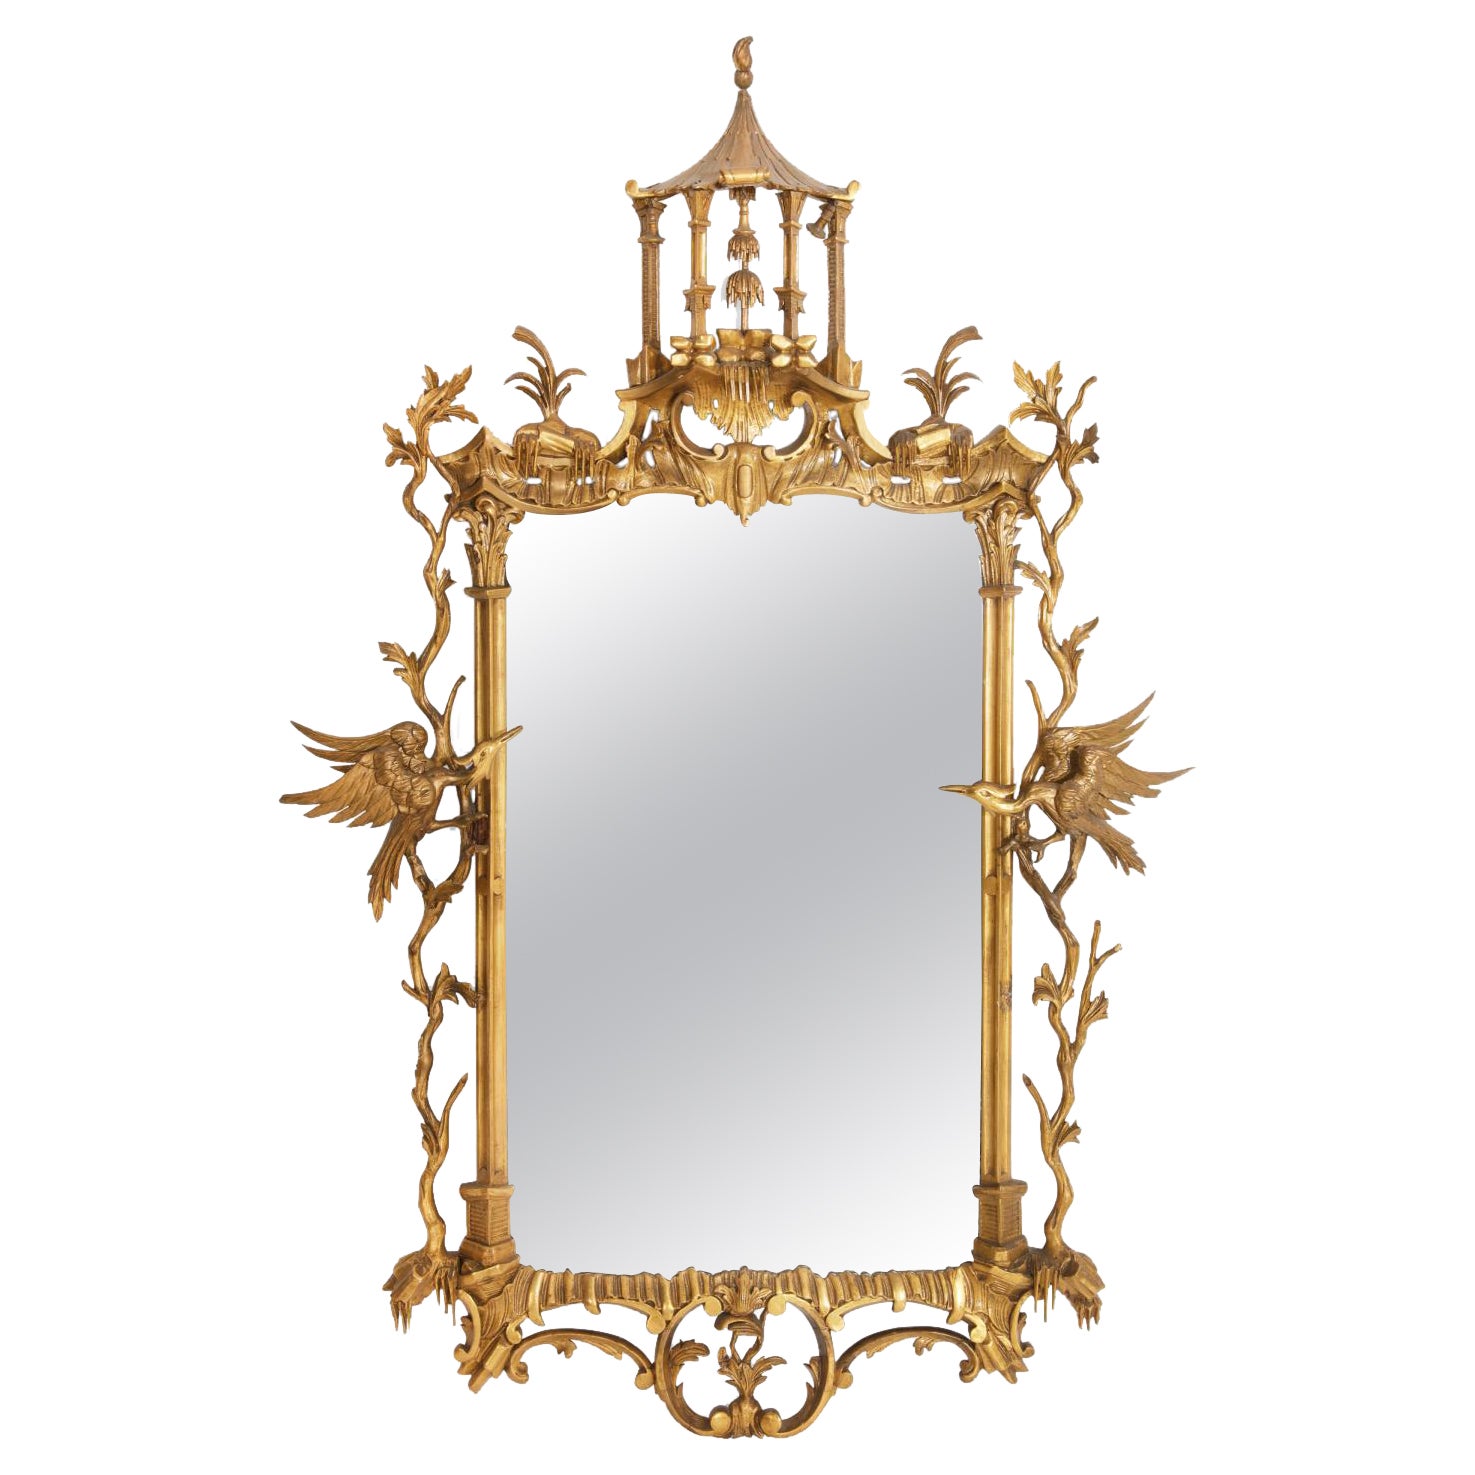 Chippendale Style Giltwood Mirror With Hoho Birds, 19 Century